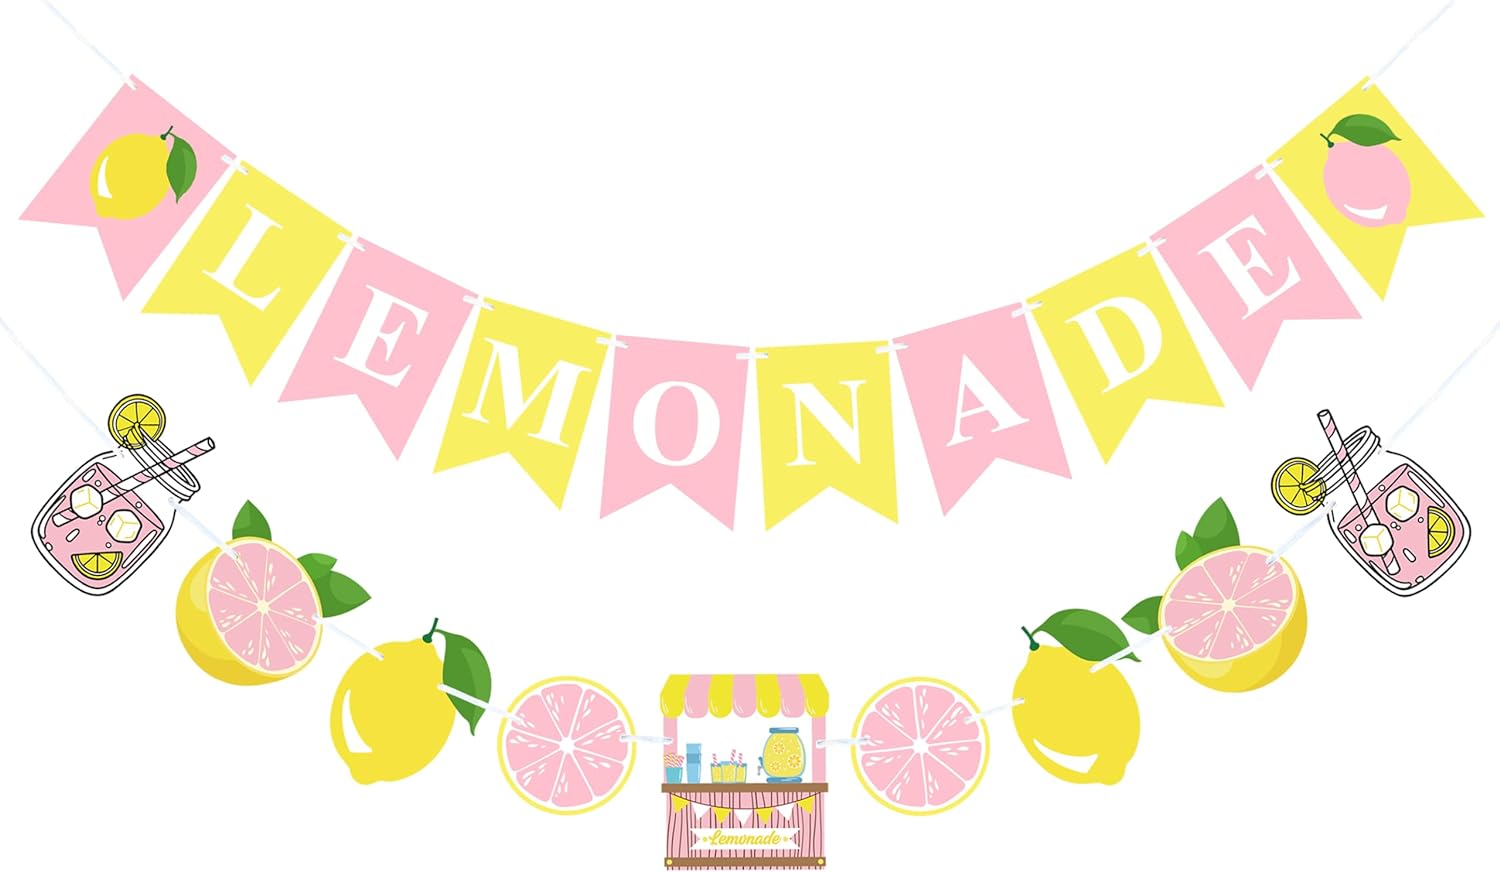 This banner is so fun - the colors are perfect, the yellows and pinks are bright but not obnoxiously so. It would be great for a first birthday party, shower (bridal or baby), or any sort of event. My daughter is adding it to to the lemonade stand we've been building so she can draw in customers at our next local garage sale event.She loves the details in the banner - especially the cute mason jars full of lemonade!